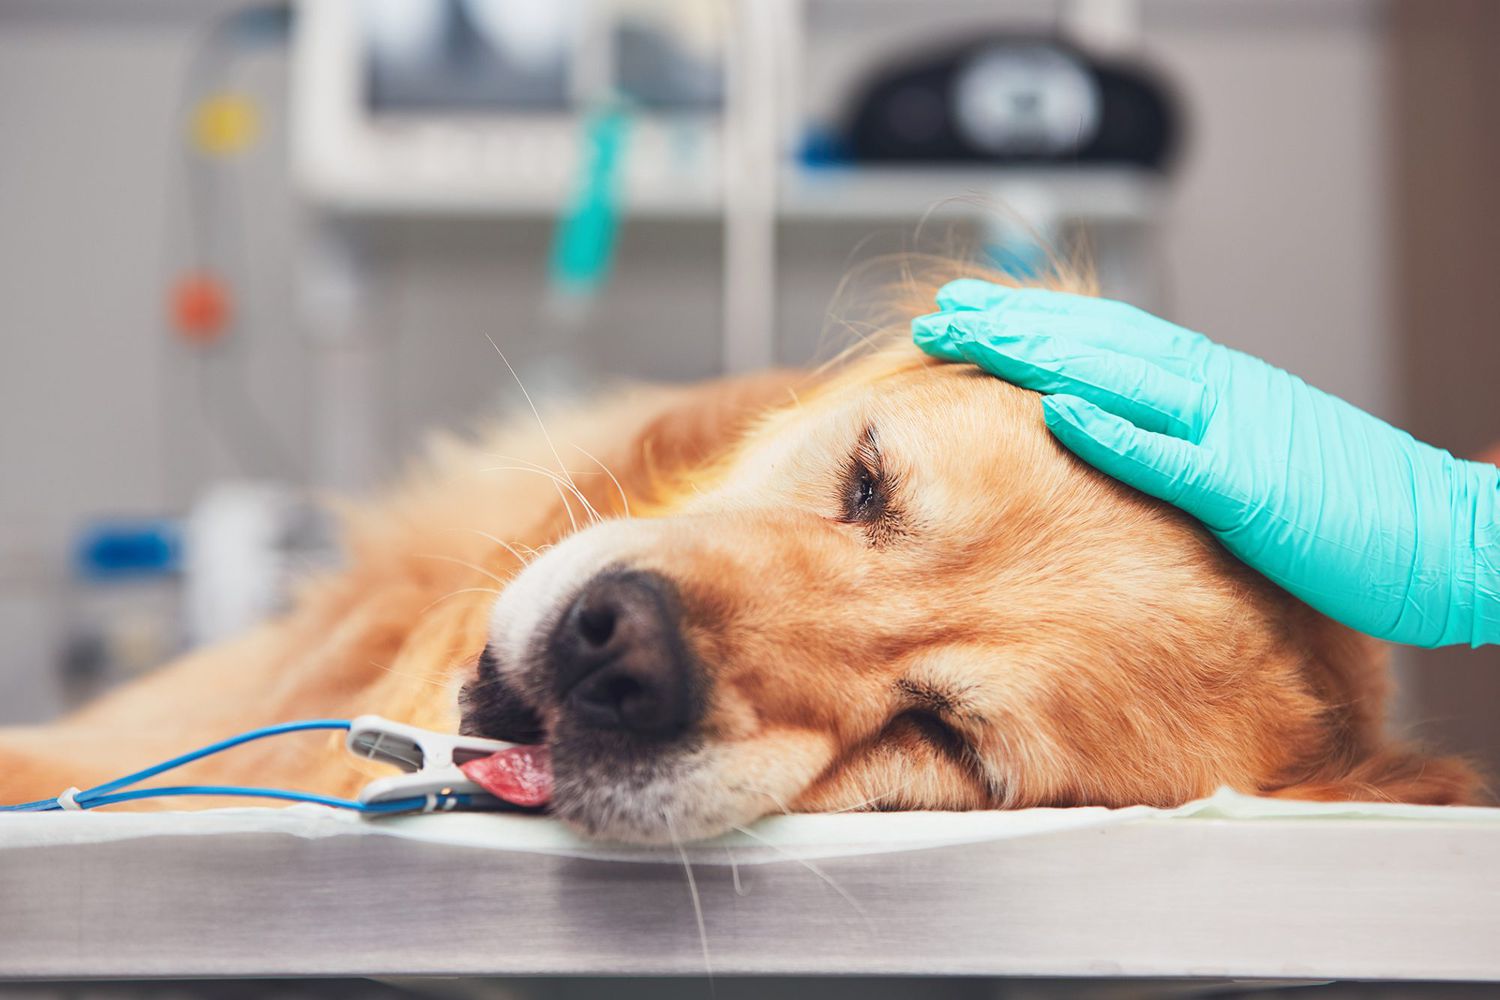 Dog Anesthesia: Safety, Side Effects, and Recovery | Daily Paws